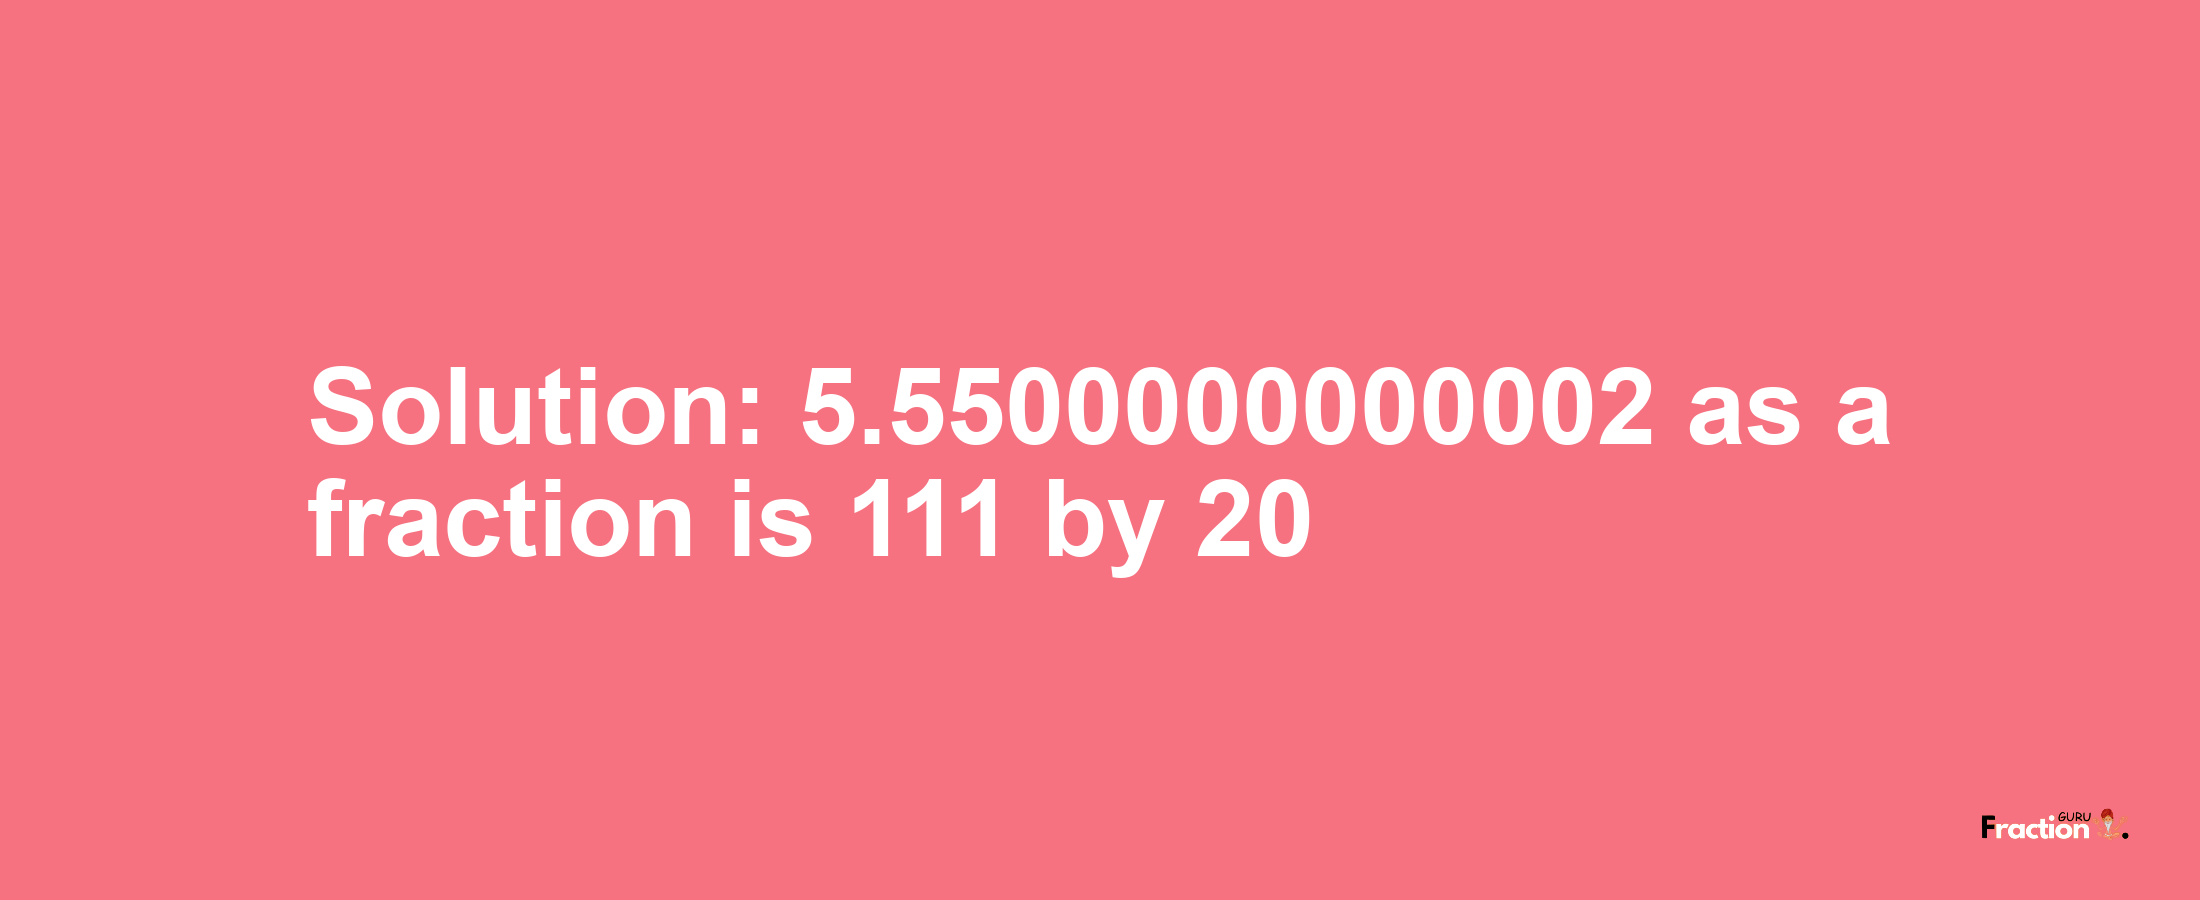 Solution:5.5500000000002 as a fraction is 111/20